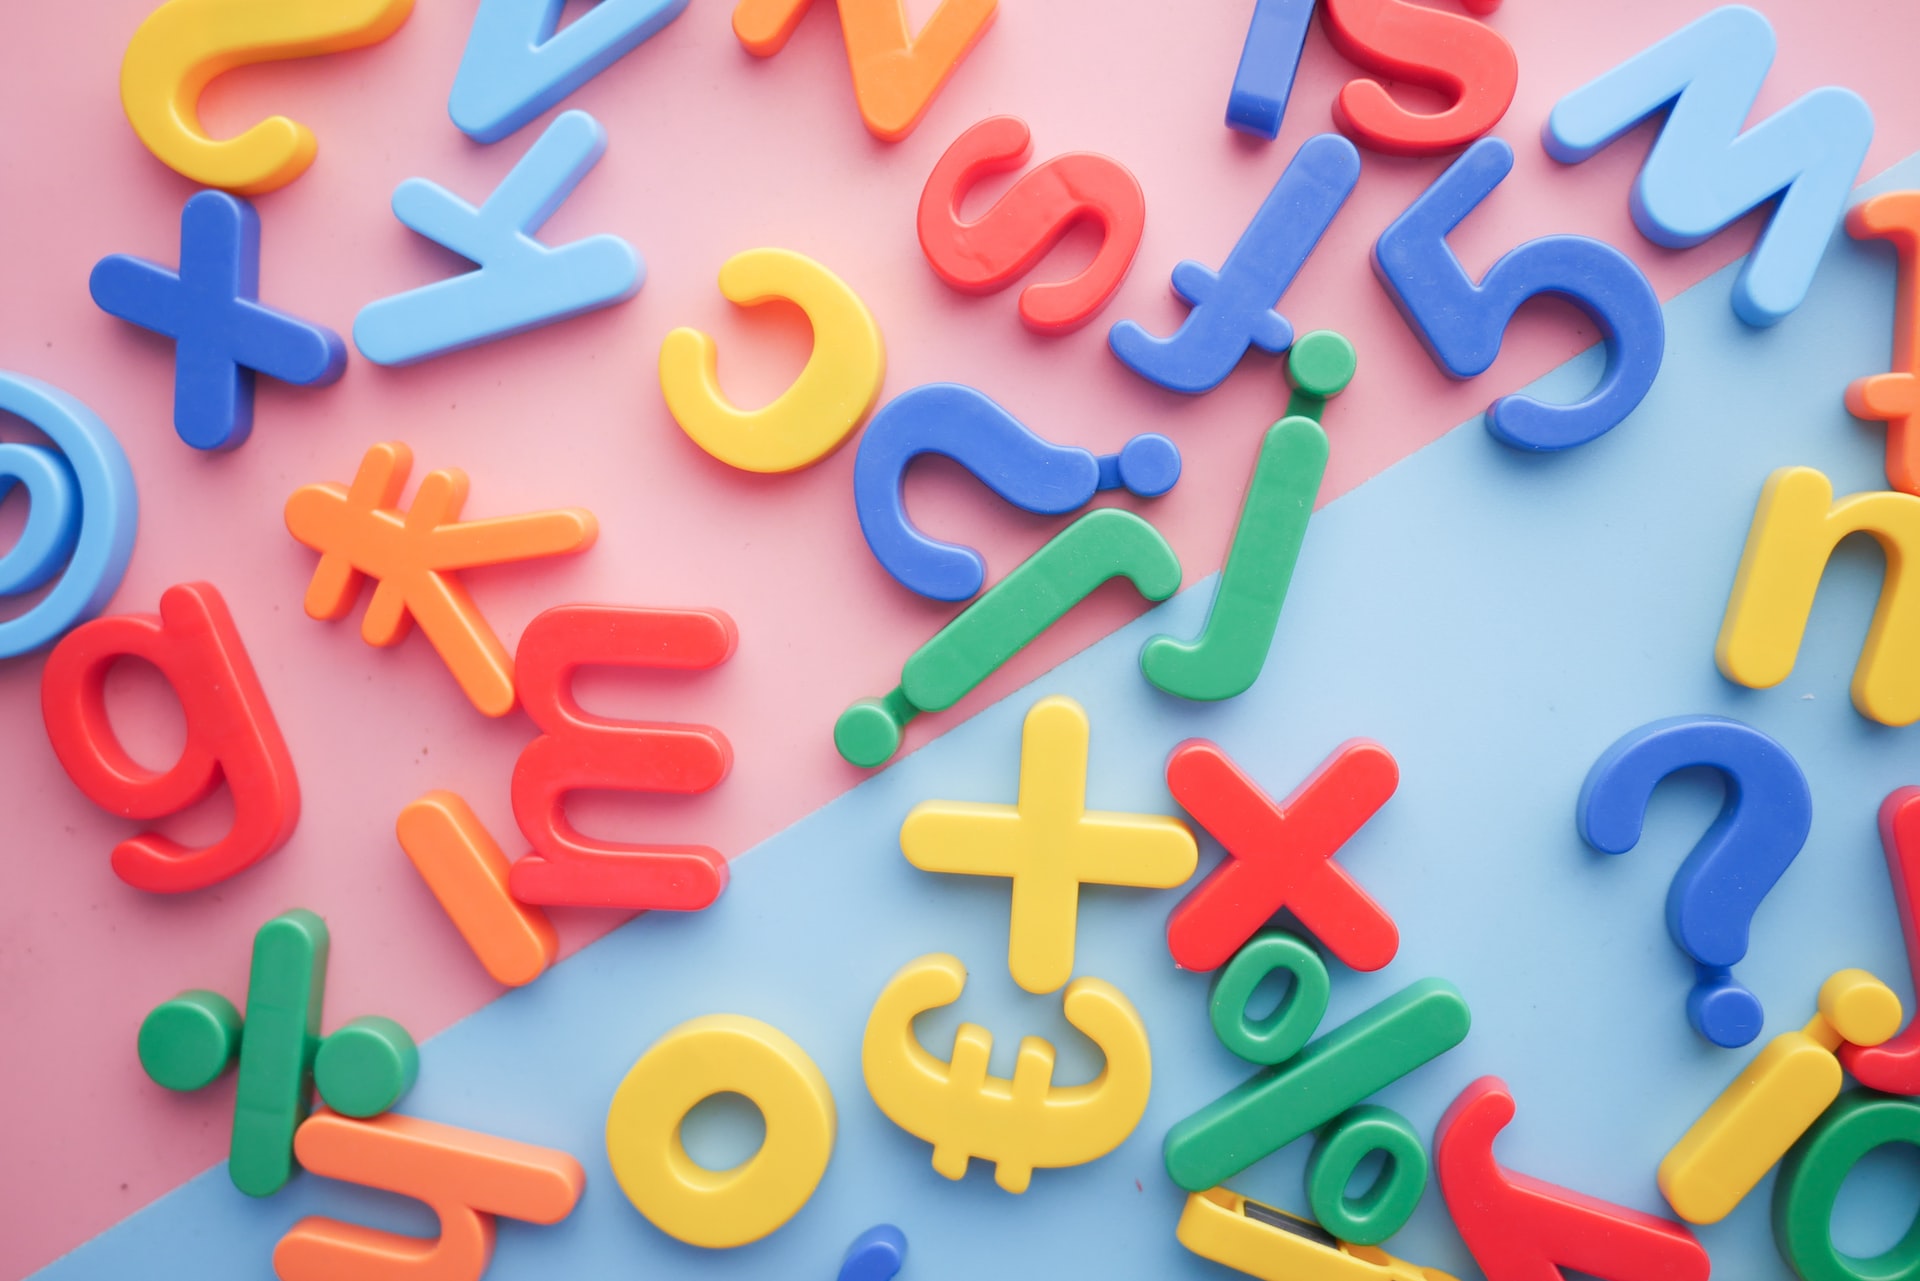 Colourful English letters and symbols.